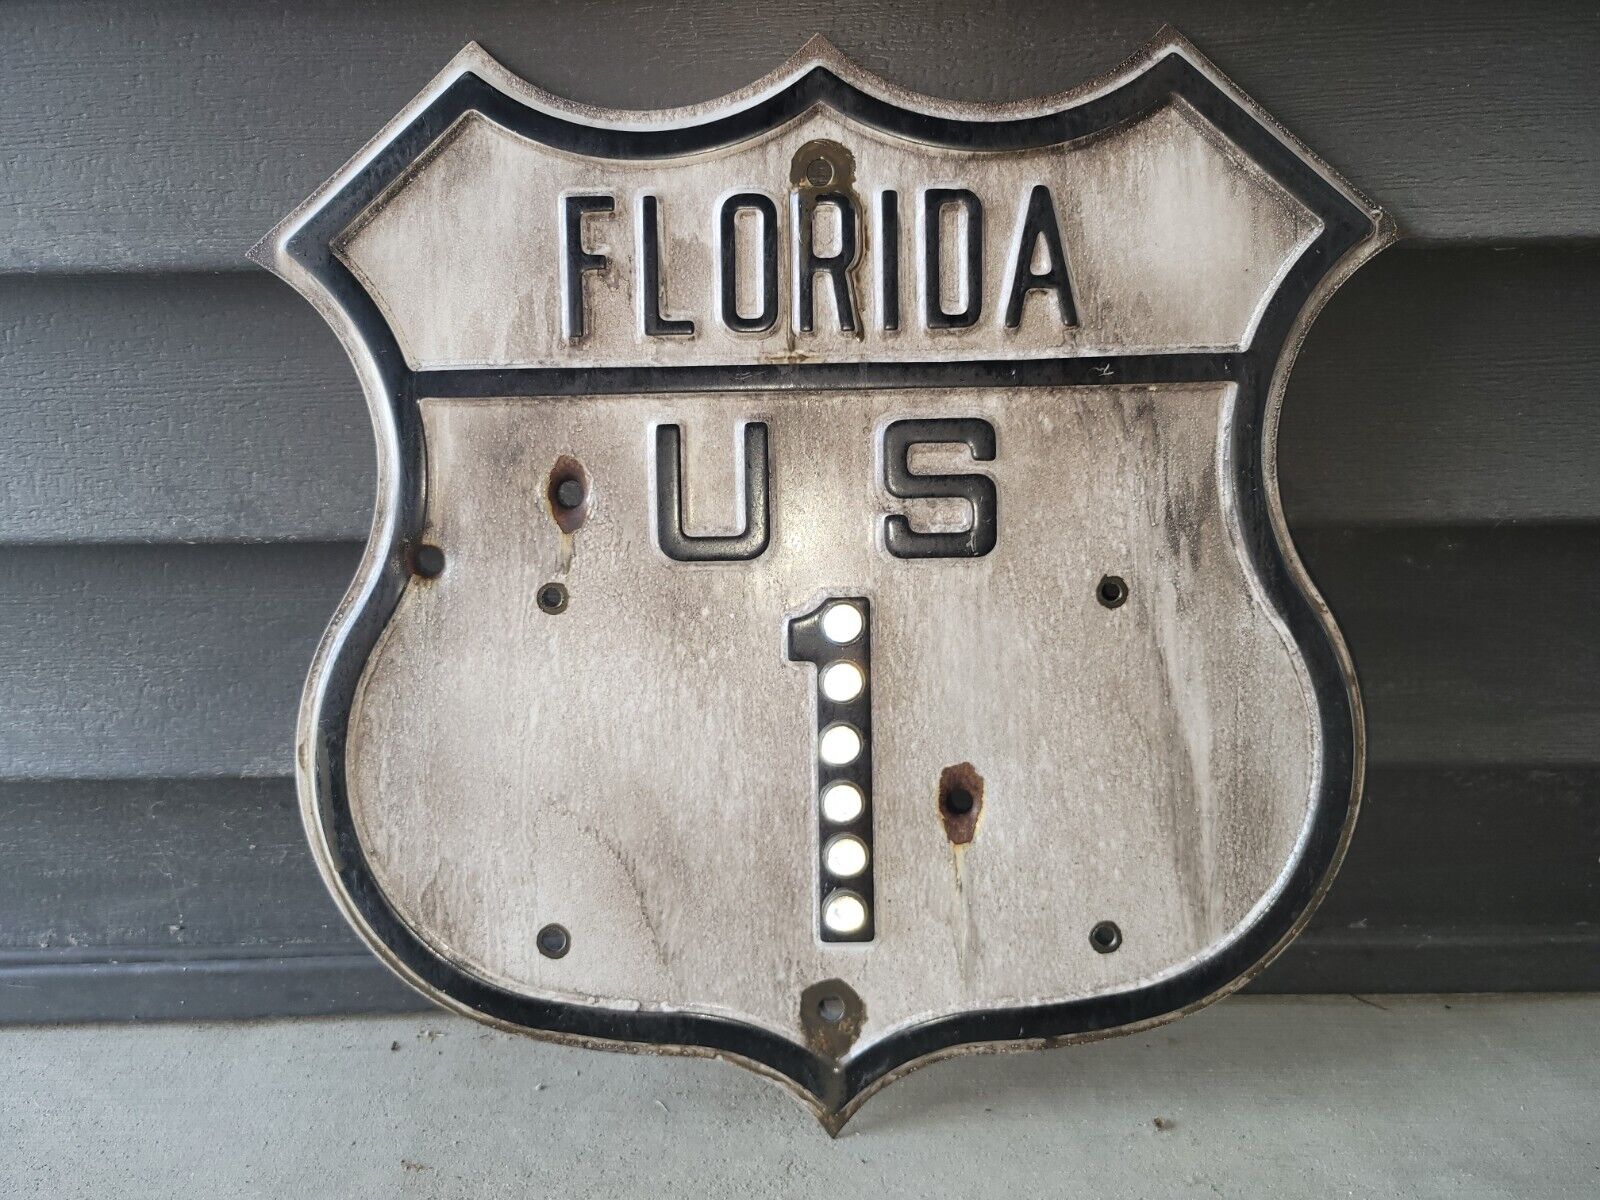 FLORIDA US ROUTE 1 HIGHWAY 1 STEEL SHIELD ROAD SIGN 16